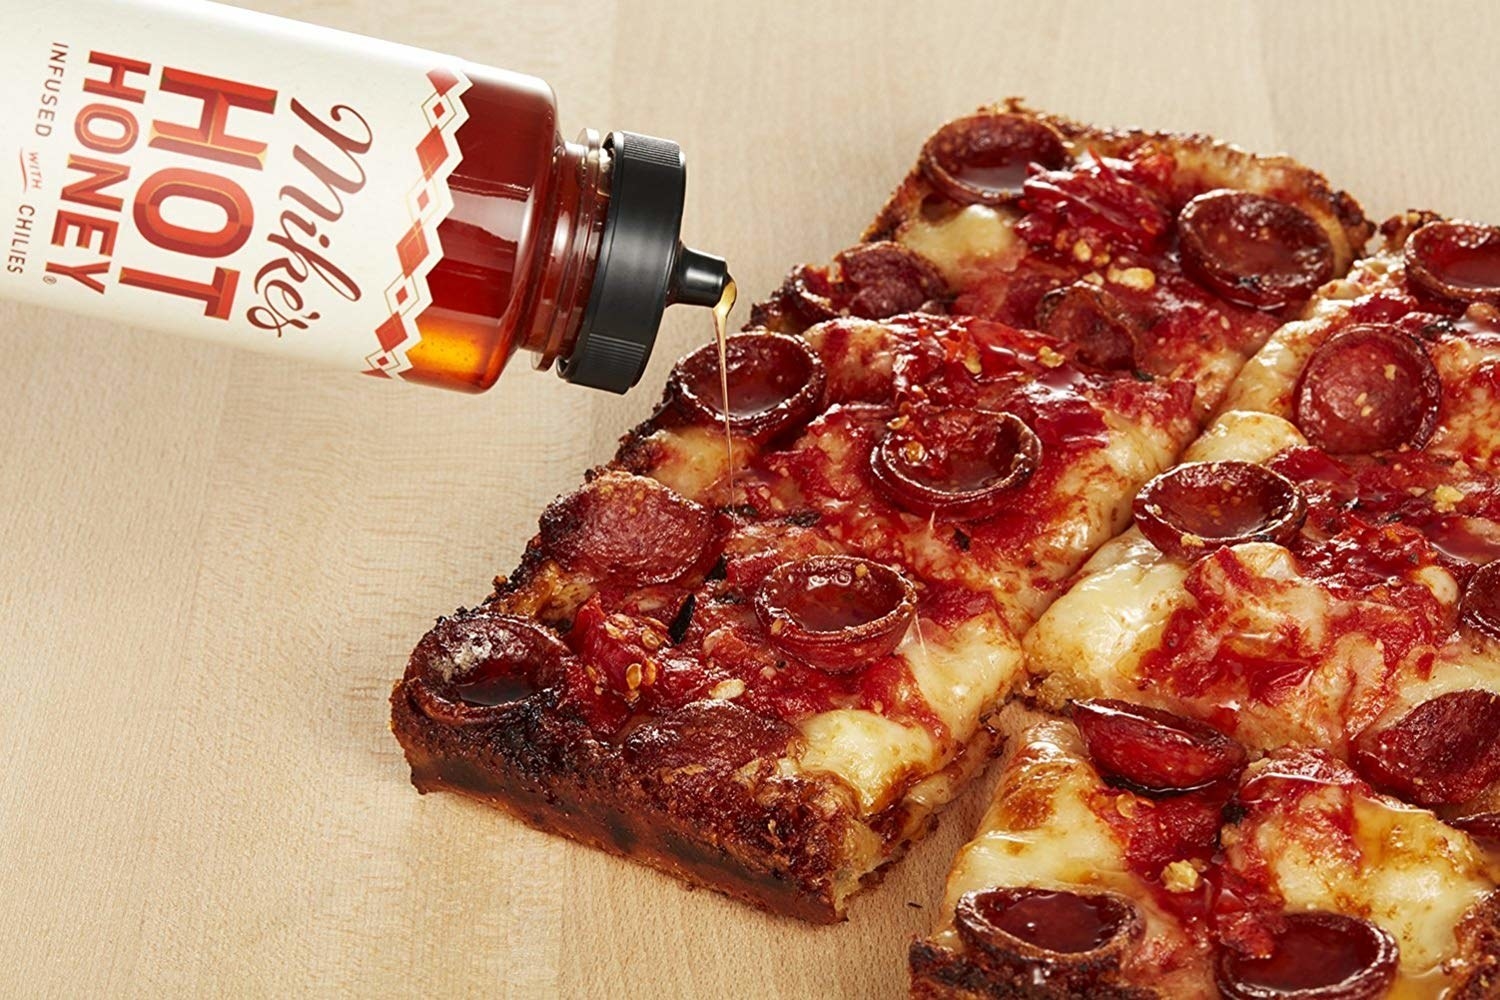 the hot honey being squeezed onto a pepperoni pizza